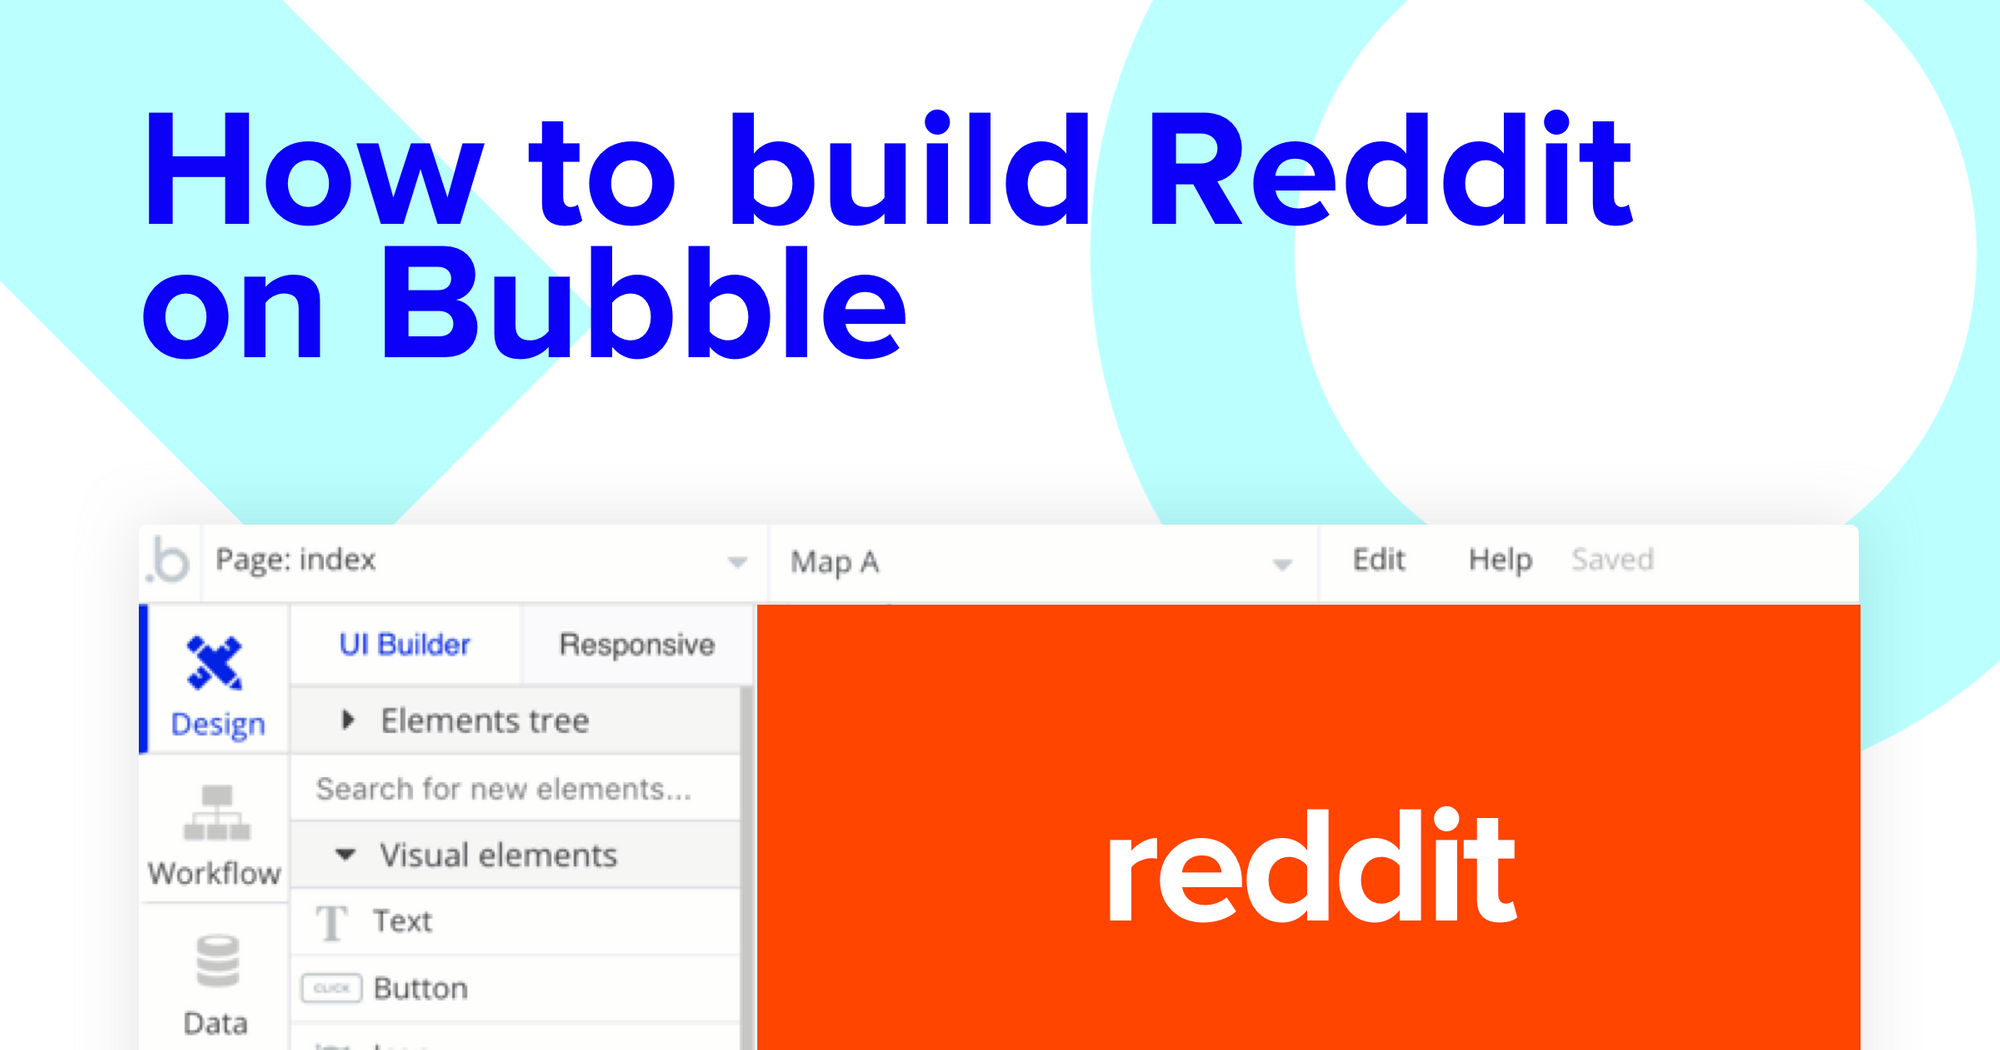 How To Build A Reddit Clone With No Code - Bubble